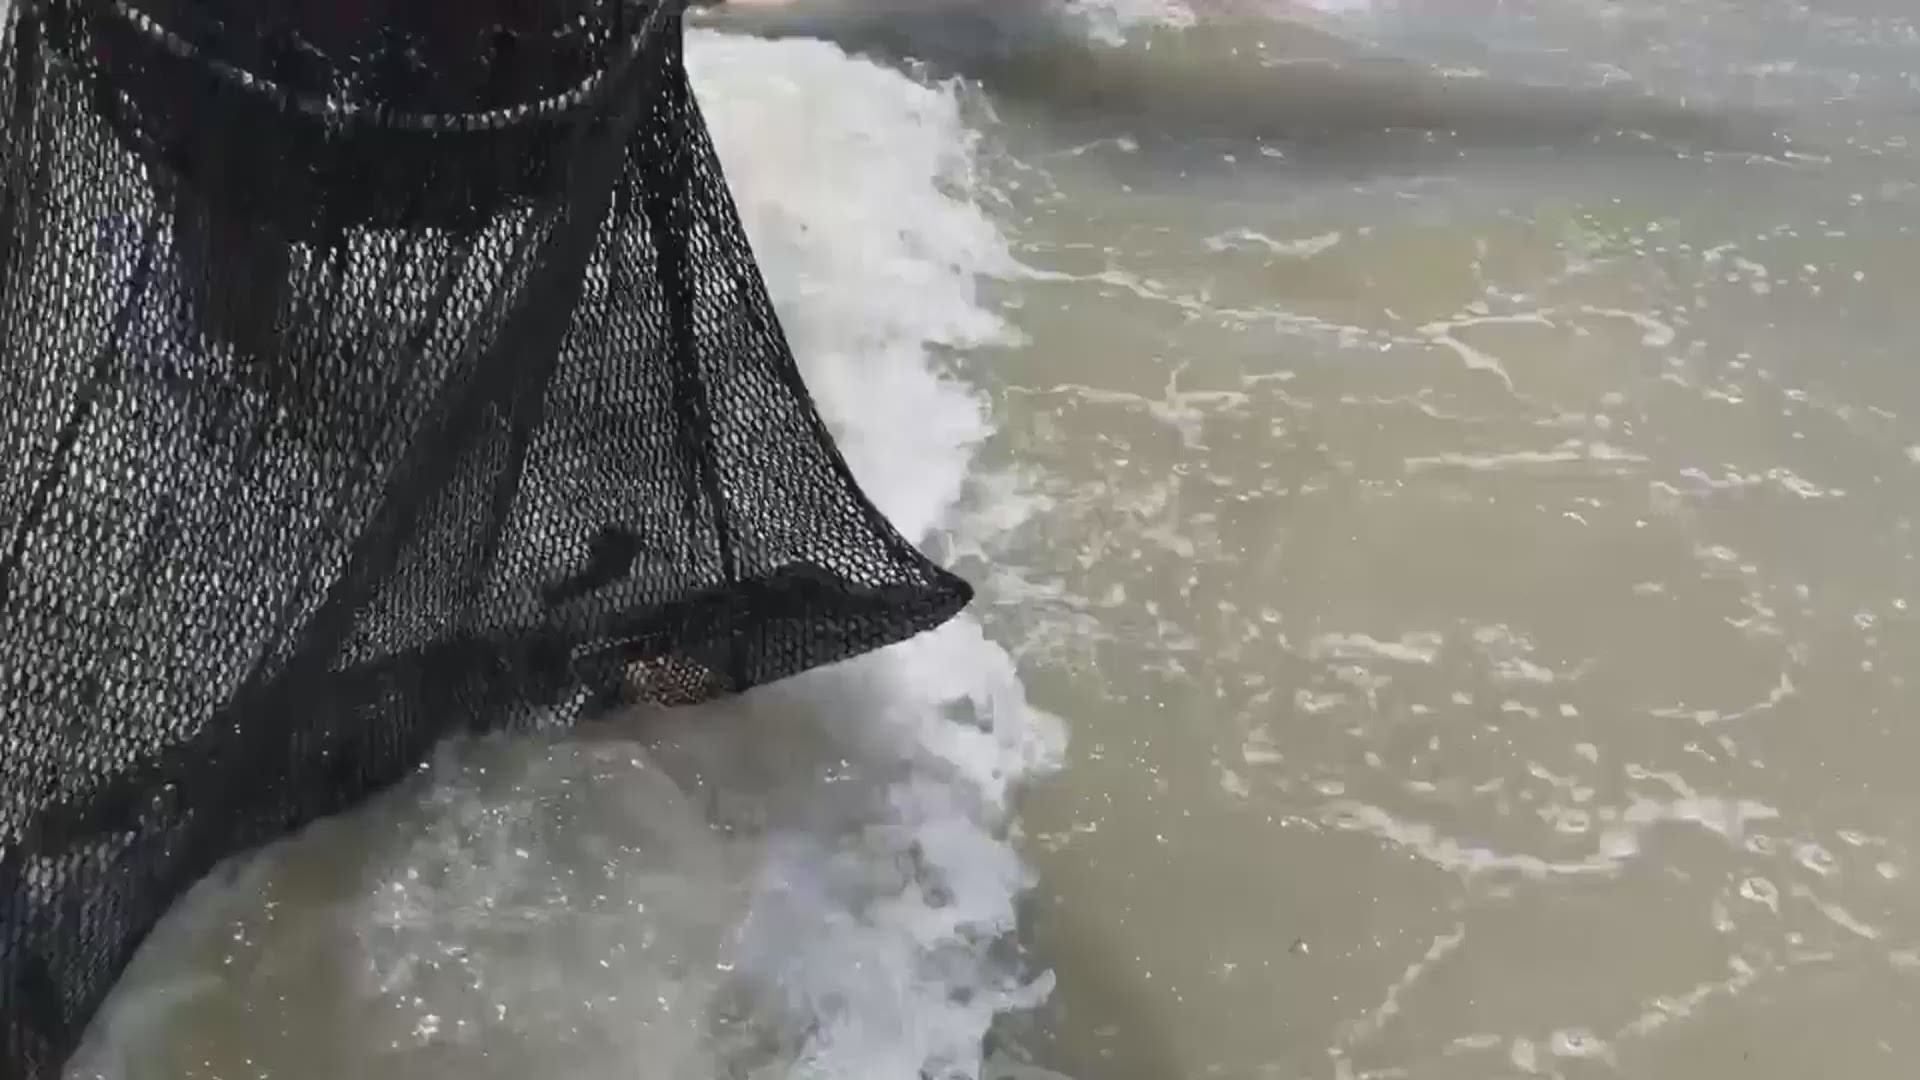 The Florida Fish and Wildlife Conservation Commission removed a 3-foot long alligator from Jacksonville Beach Saturday.
WJAX said a lifeguard paddled out to net the alligator. 
FWC said it is uncommon to find an alligator at the beach but it’s not unheard of